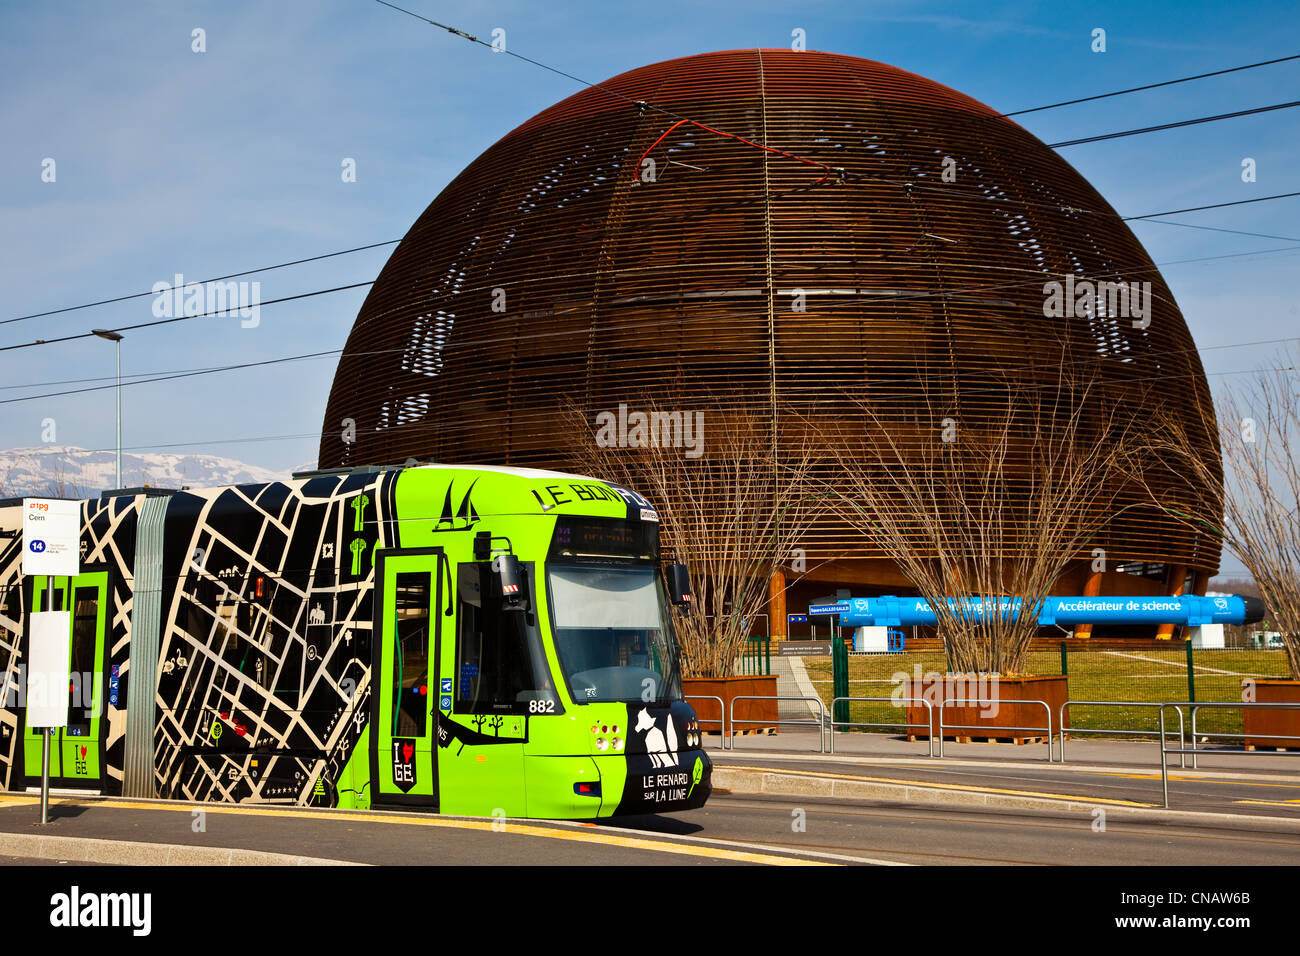 A commuter tram stopped at the CERN accelerator facility, Geneva, Switzerland Stock Photo